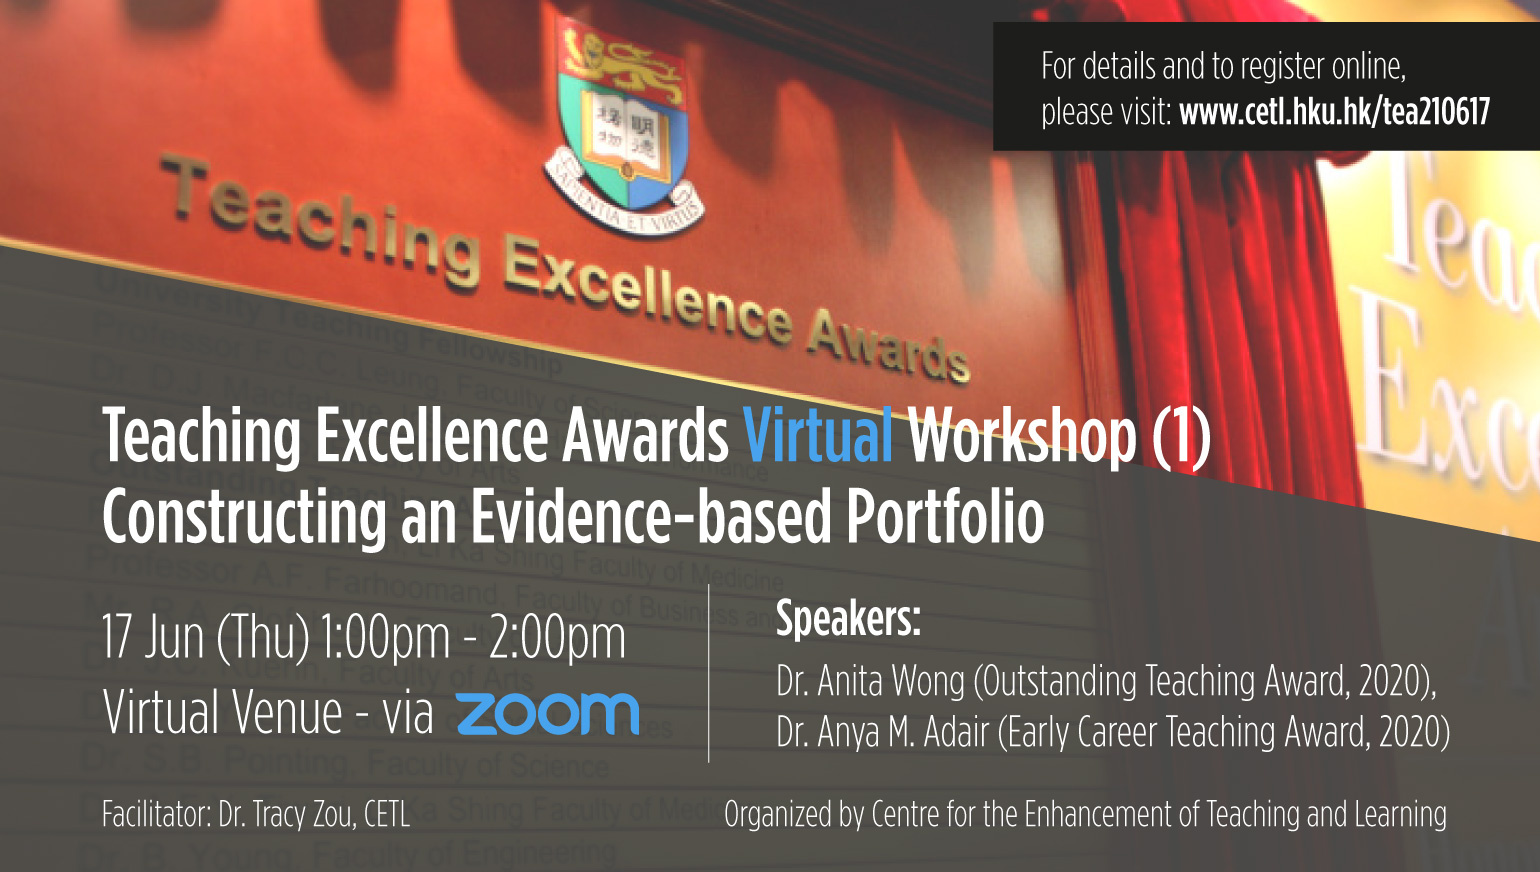 Teaching Excellence Awards Virtual Workshop (1): Constructing an Evidence-based Portfolio